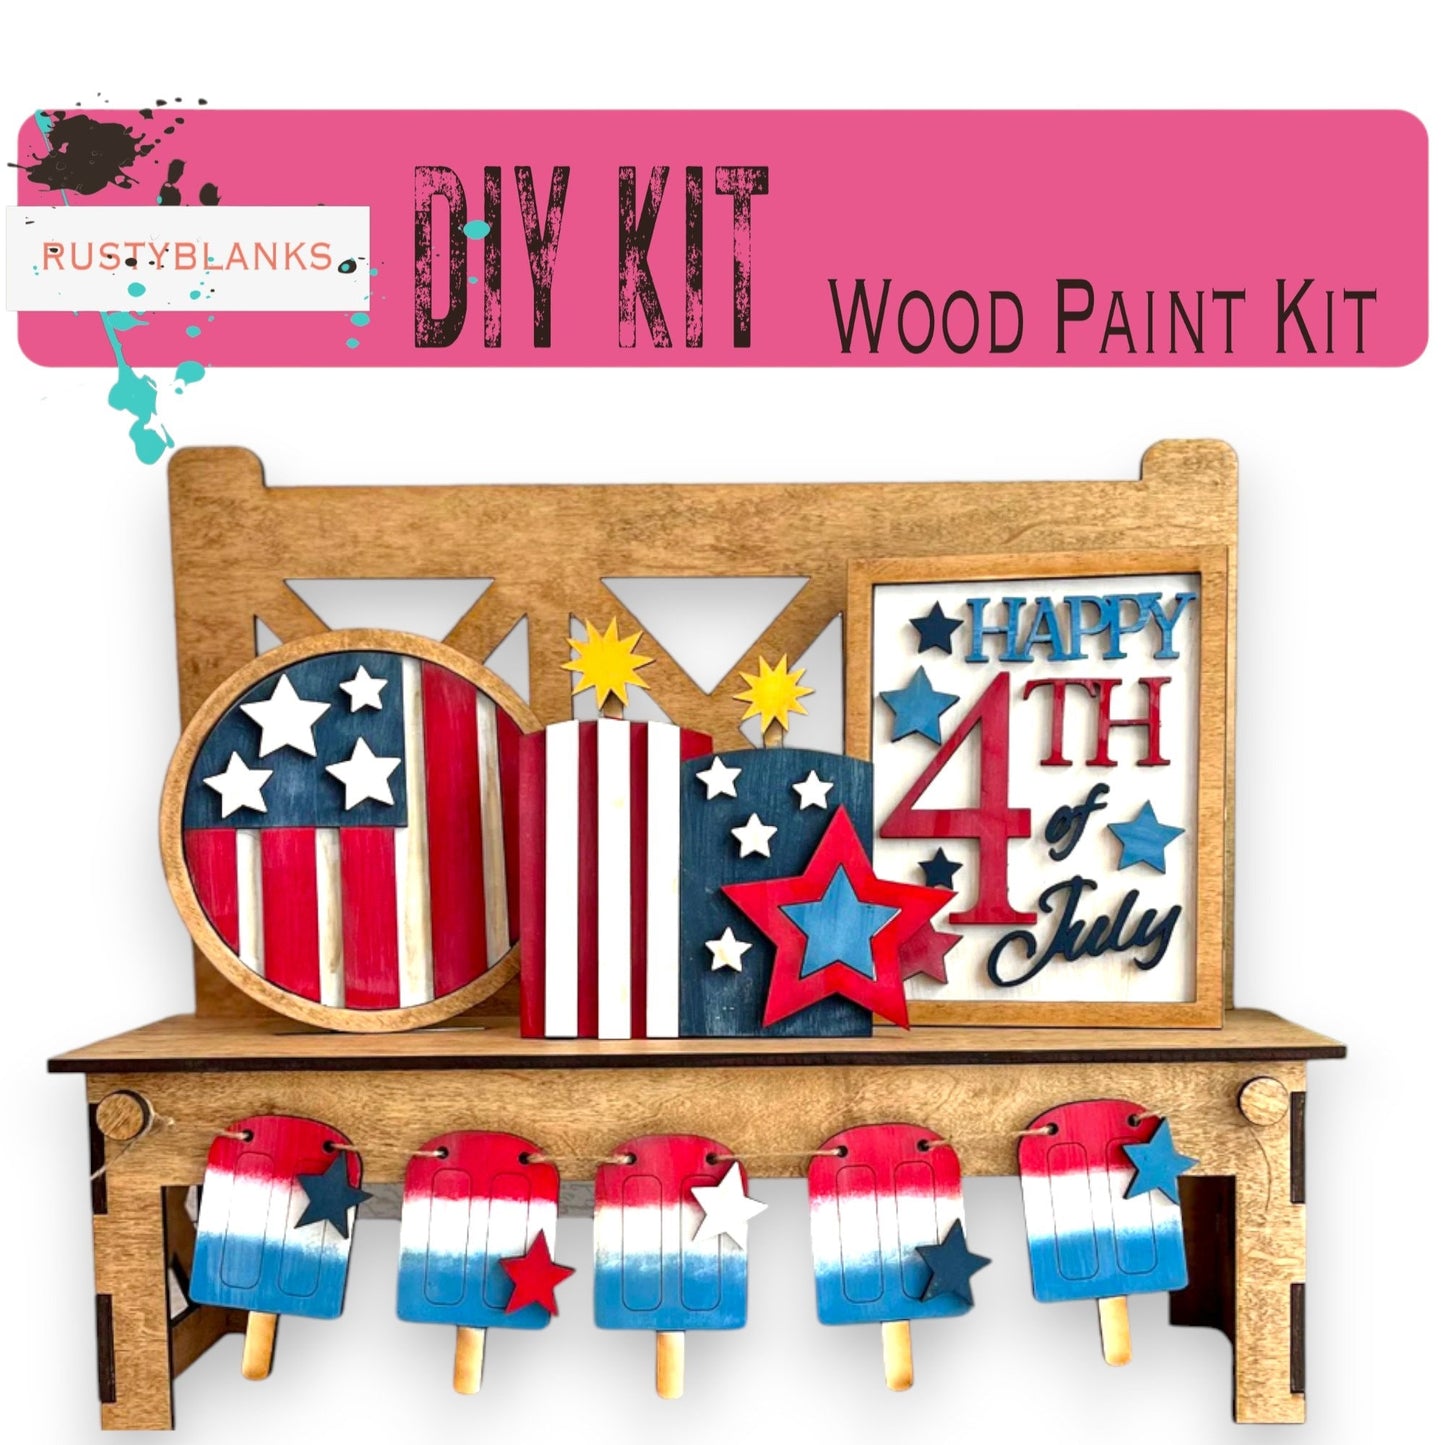 a wooden paint kit with patriotic decorations